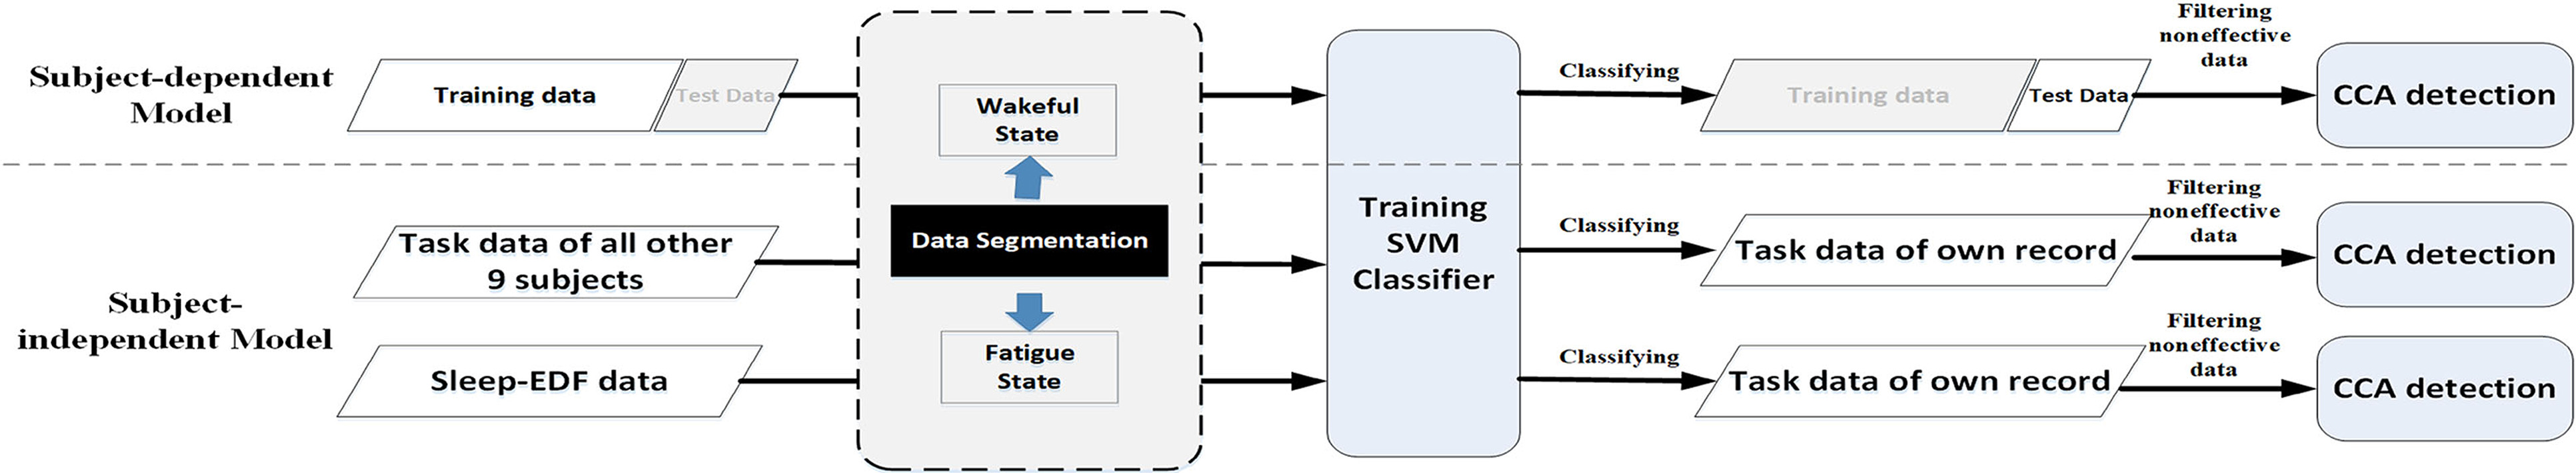 Flowchart of the data process for classification. The subject-dependent method utilized 80% of task data for training and 20% for testing. Two subject-independent models were developed for classifying all task trials into fatigue state and wakeful state, which represented non-effective and effective recognition. After alertness-model filtering, the CCA algorithm was employed for detecting SSVEP signal for labeling these effective trials.